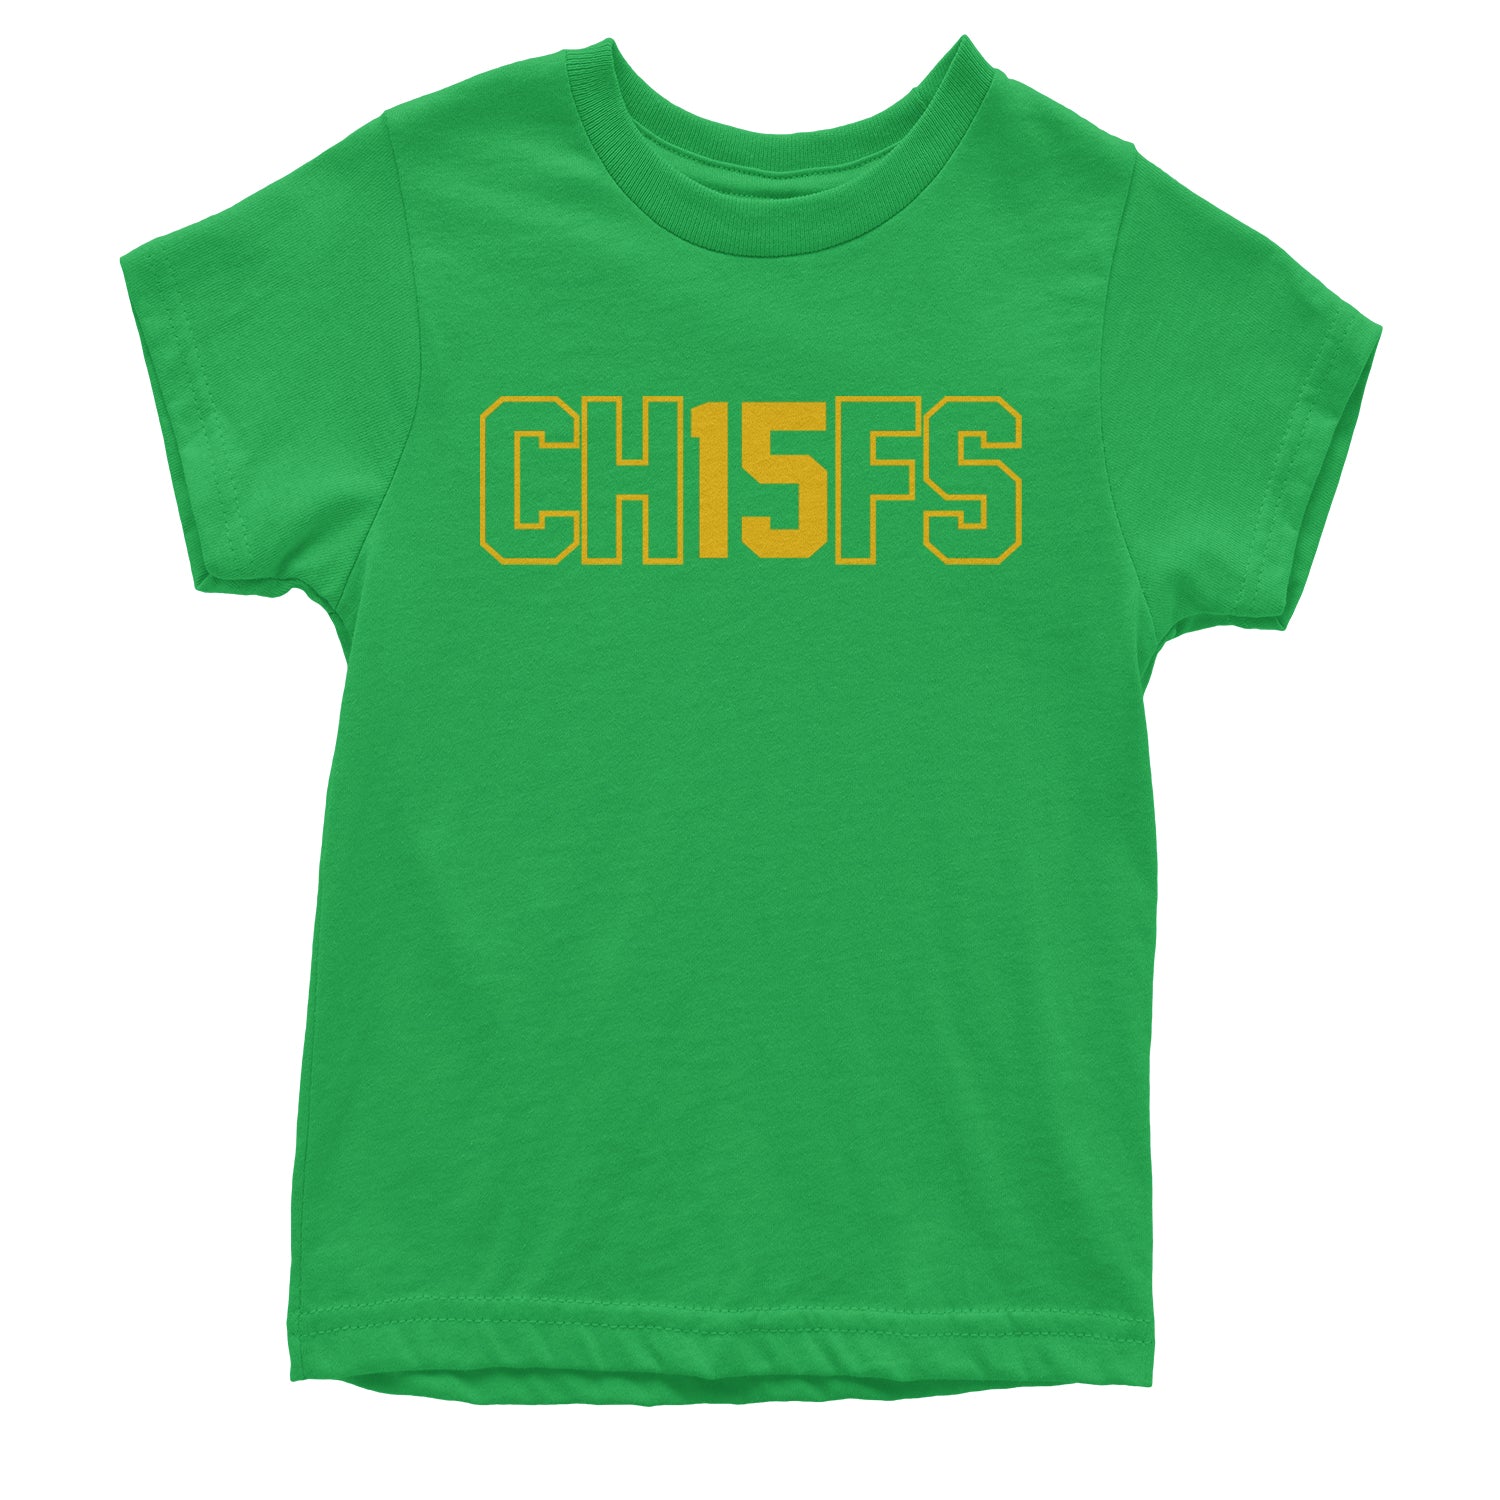 Ch15fs Chief 15 Shirt Youth T-shirt ass, big, burrowhead, game, kelce, know, moutha, my, nd, patrick, role, shut, sports, your by Expression Tees